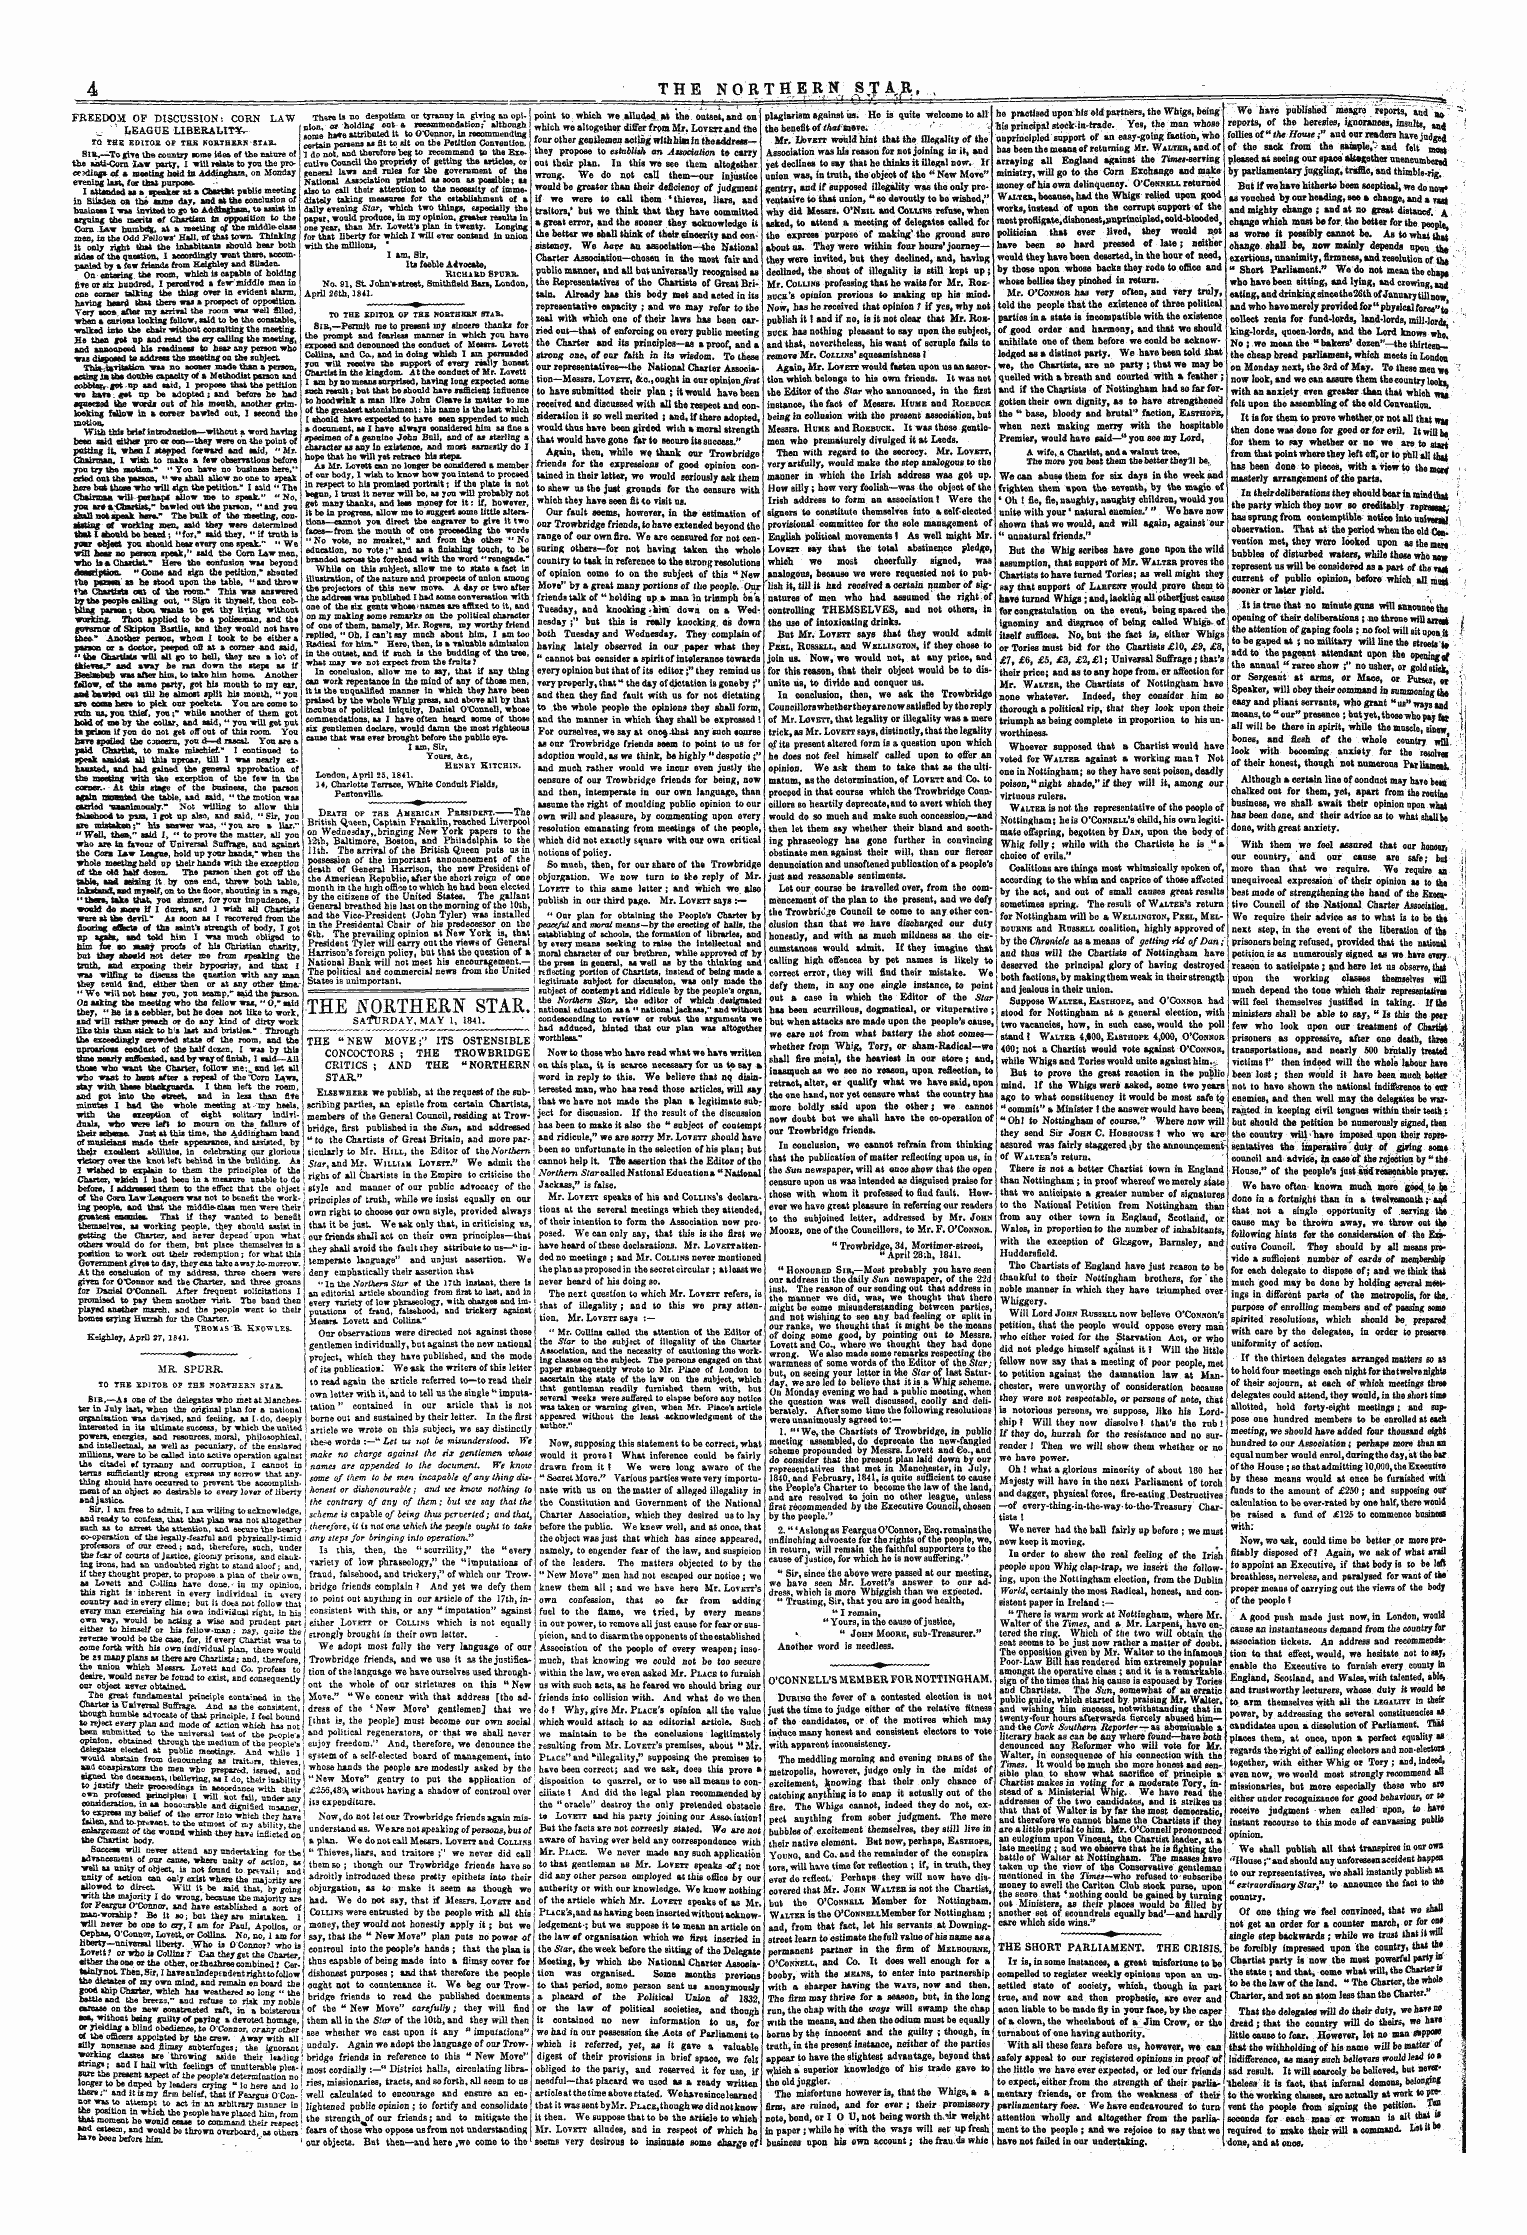 Northern Star (1837-1852): jS F Y, 1st edition - The Northern St*4.R Safurday, May 1, 1841.